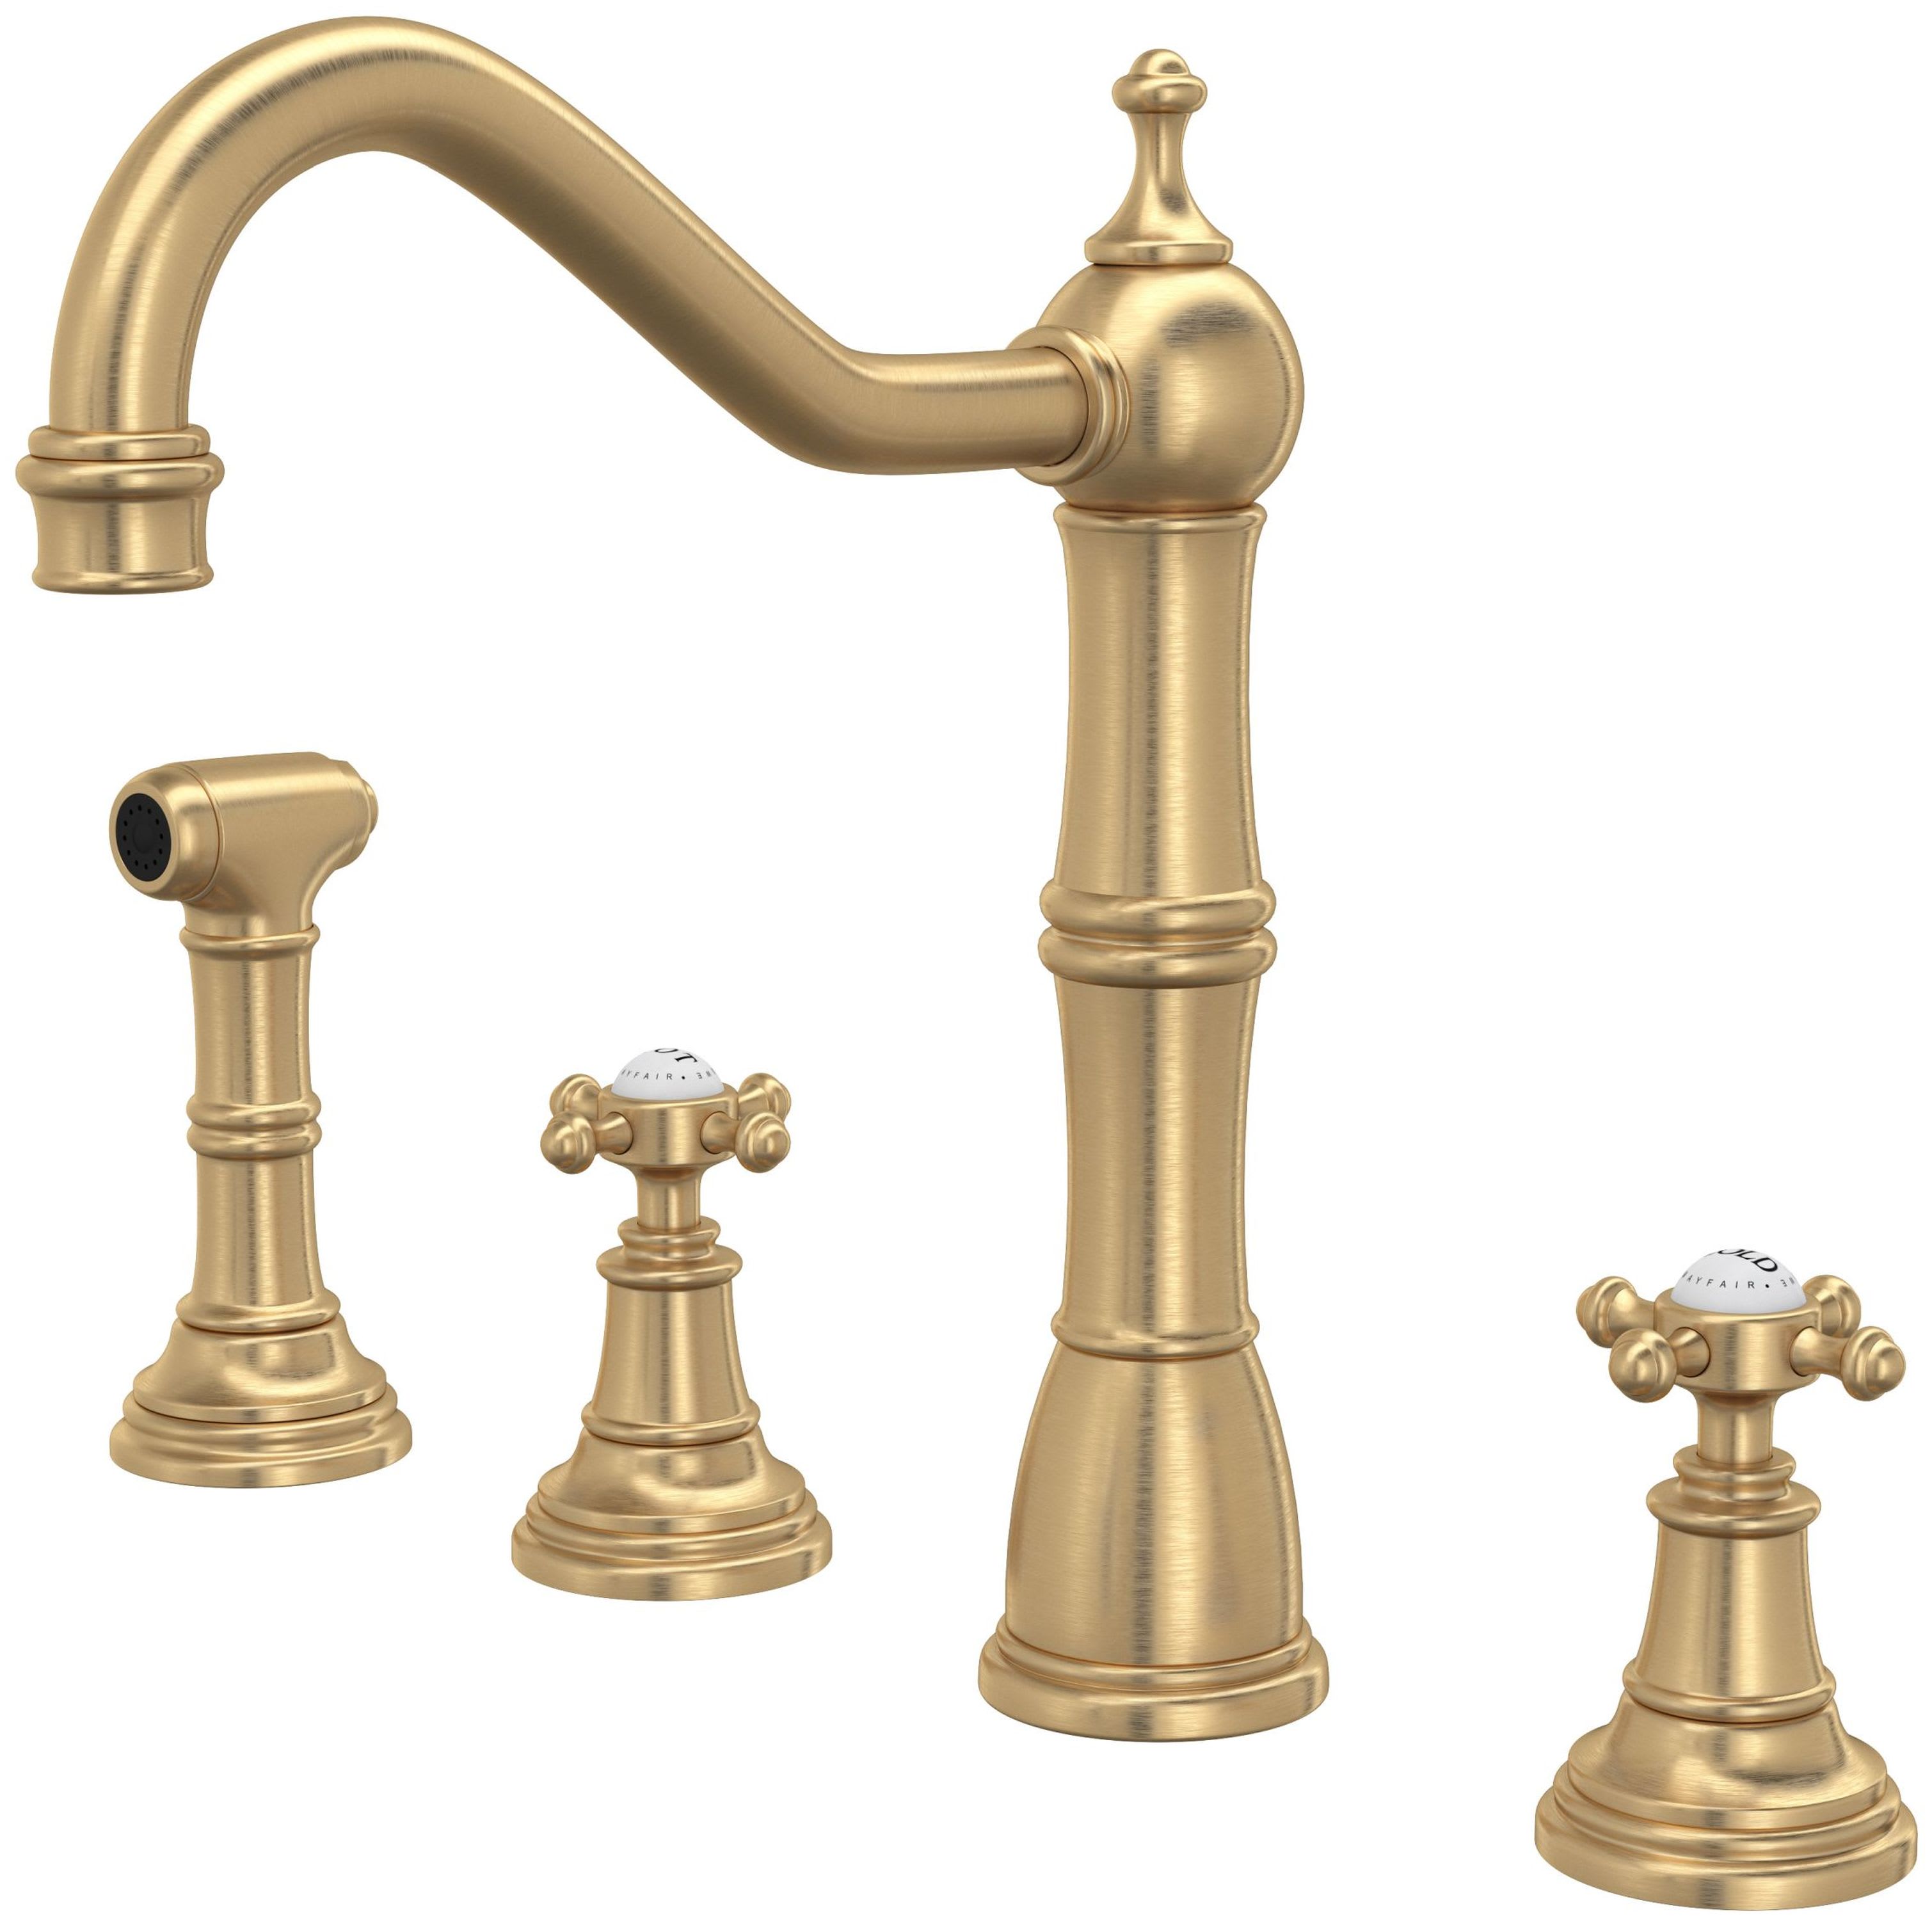 Perrin and Rowe U.4775X-EG-2 English Gold Edwardian 1.8 GPM Widespread Kitchen  Faucet Includes Side Spray